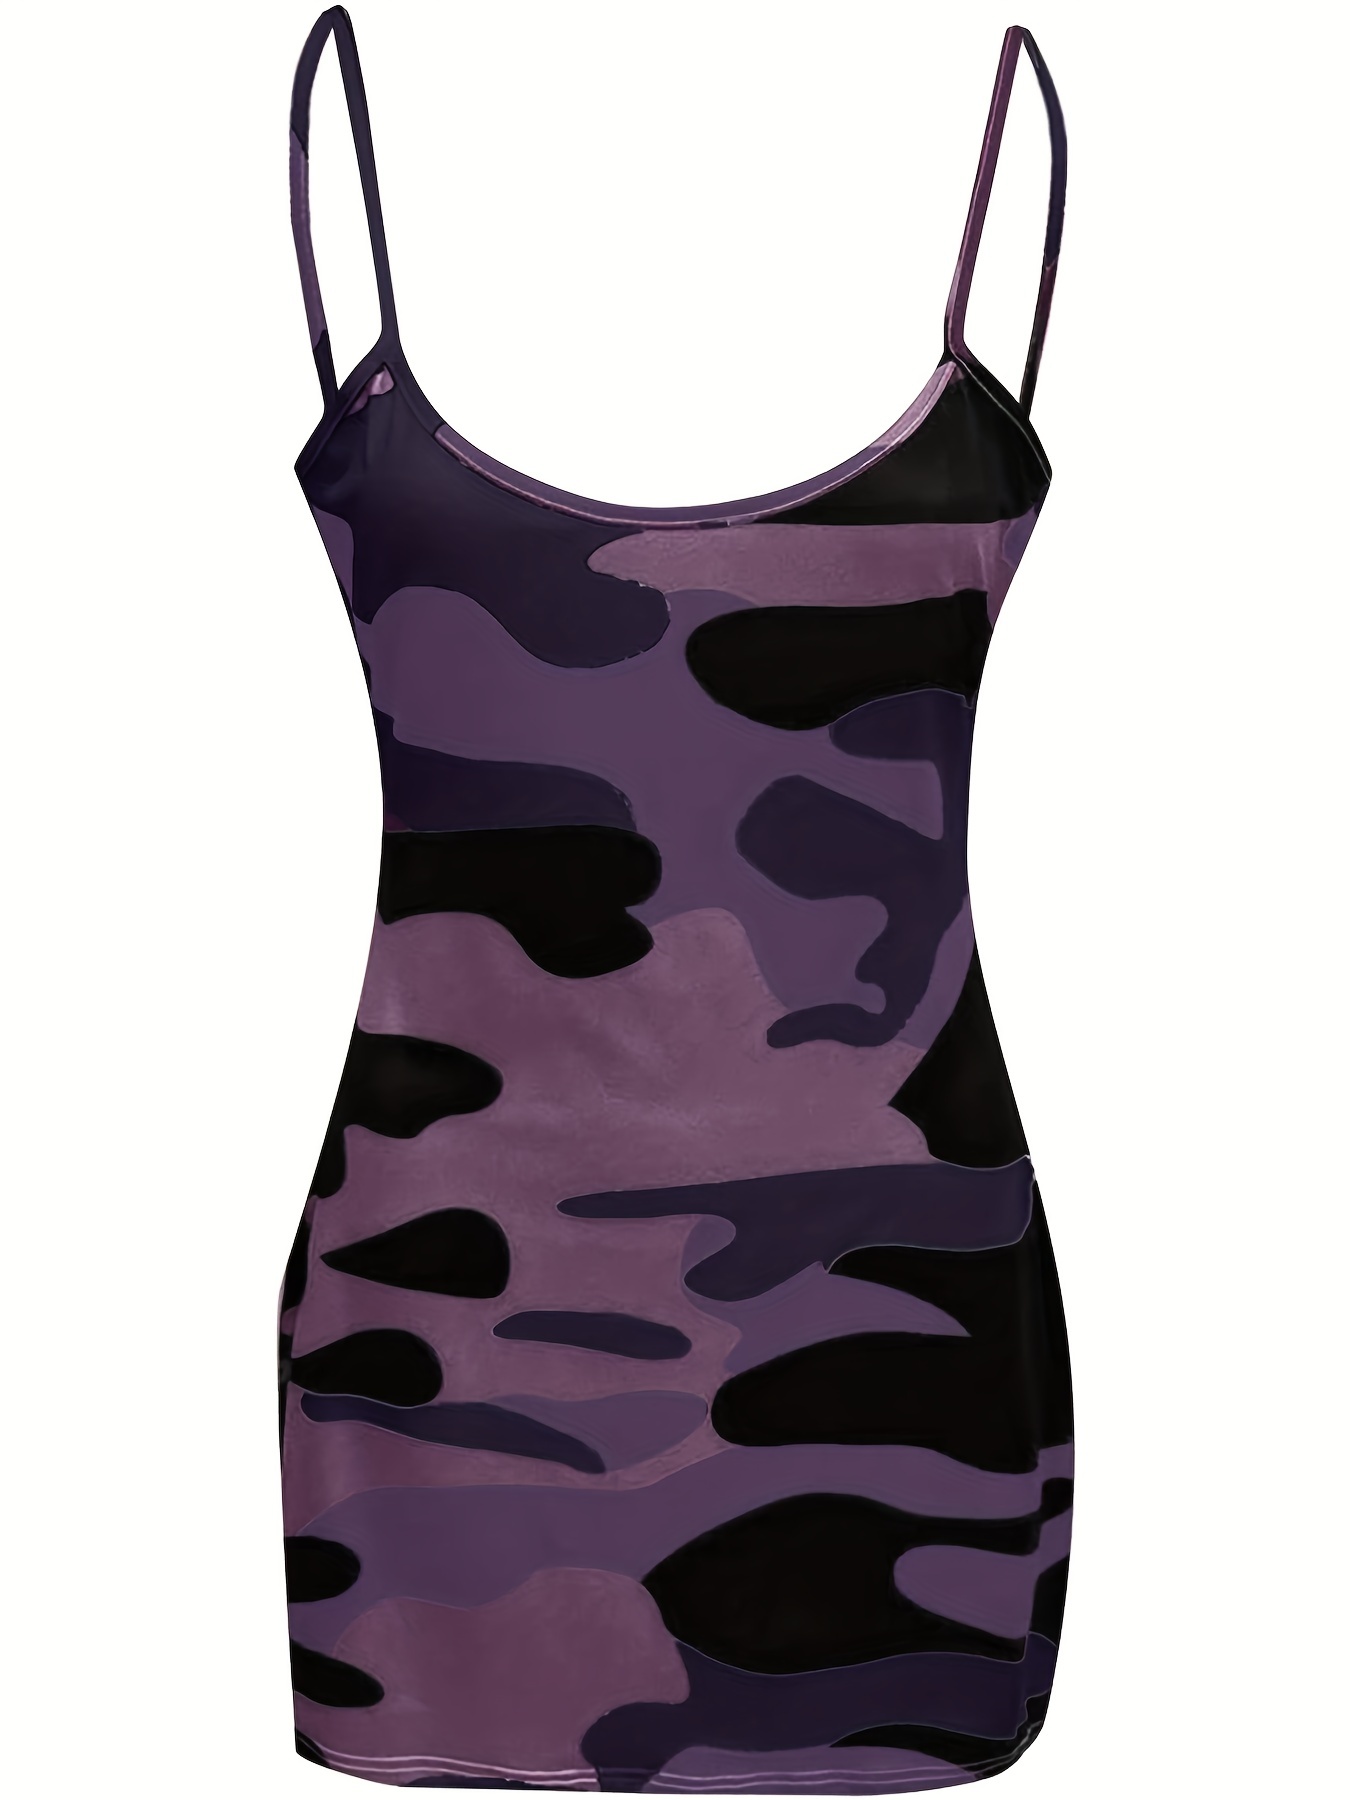 camouflage print cami dress casual backless spaghetti dress womens clothing details 8